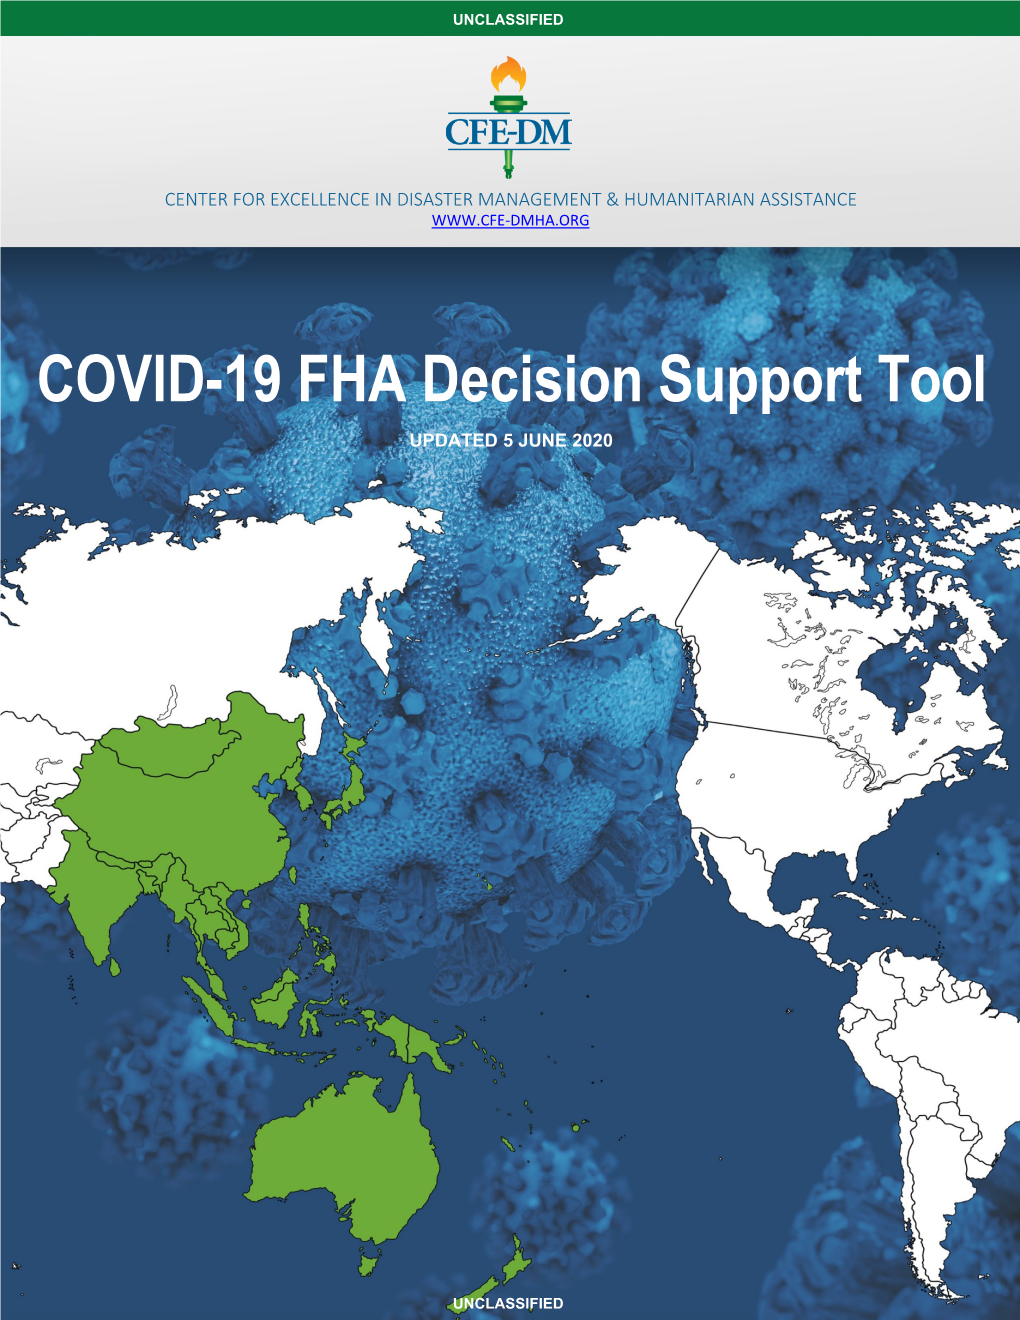 COVID-19 FHA Decision Support Tool UPDATED 5 JUNE 2020